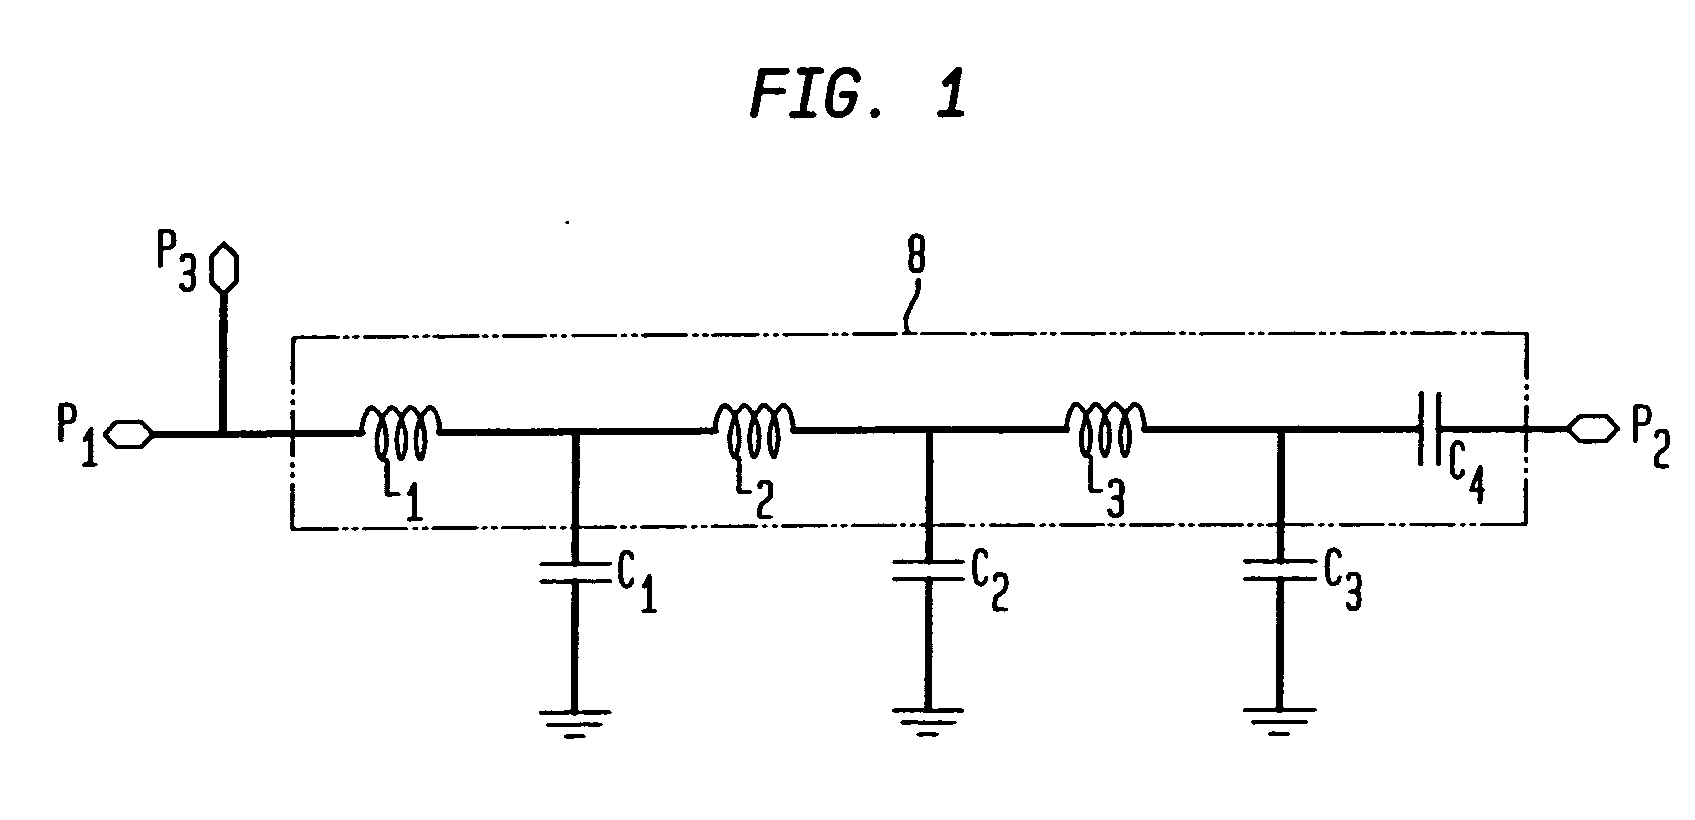 Combined matching and filter circuit